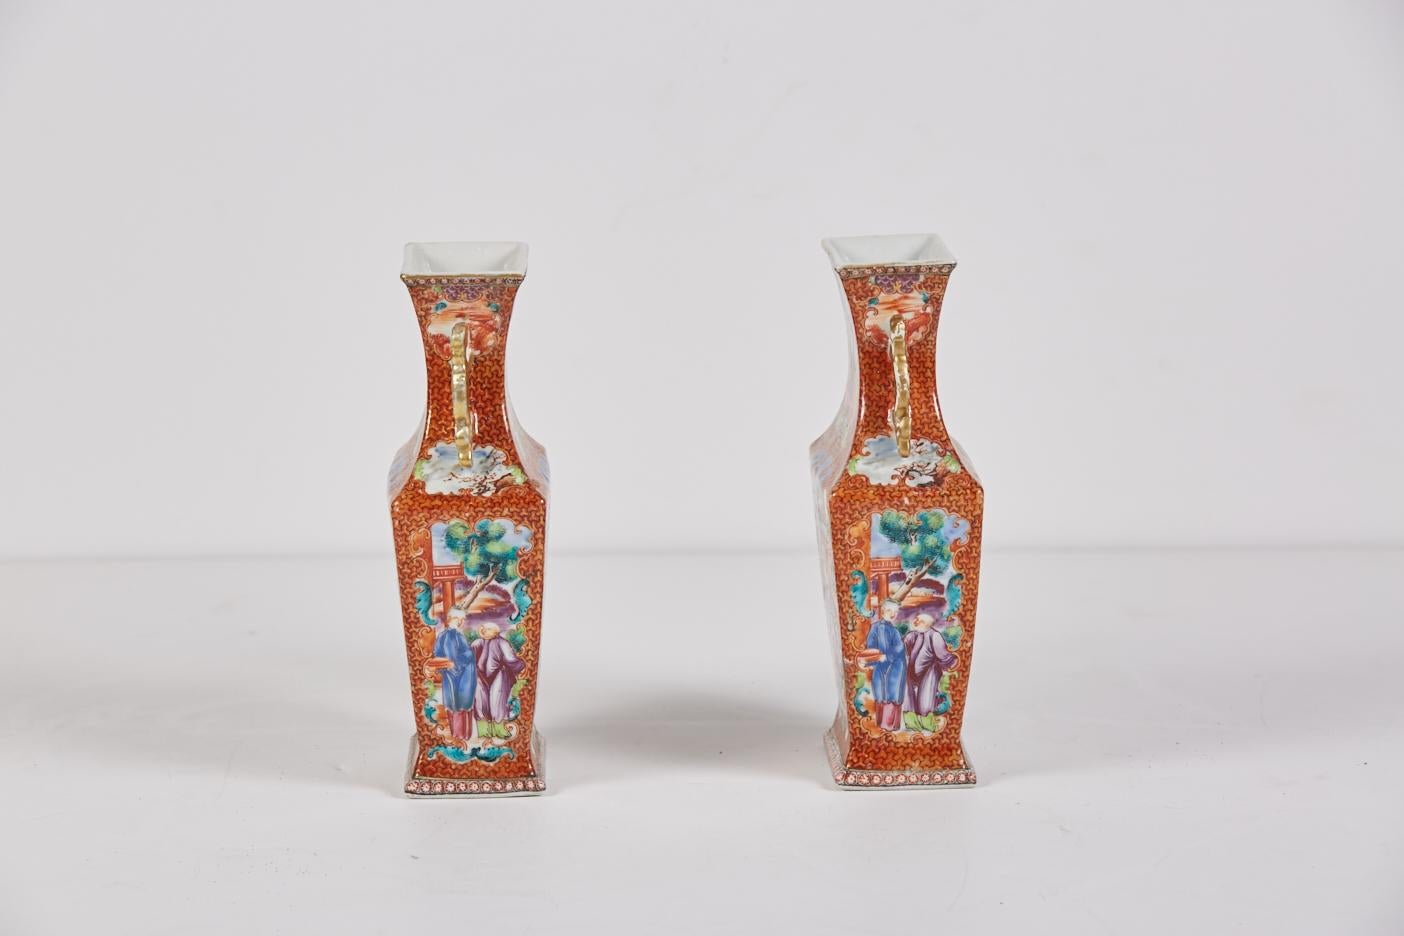 Pair of Chinese export porcelain vases decorated with overglaze enamel in the 